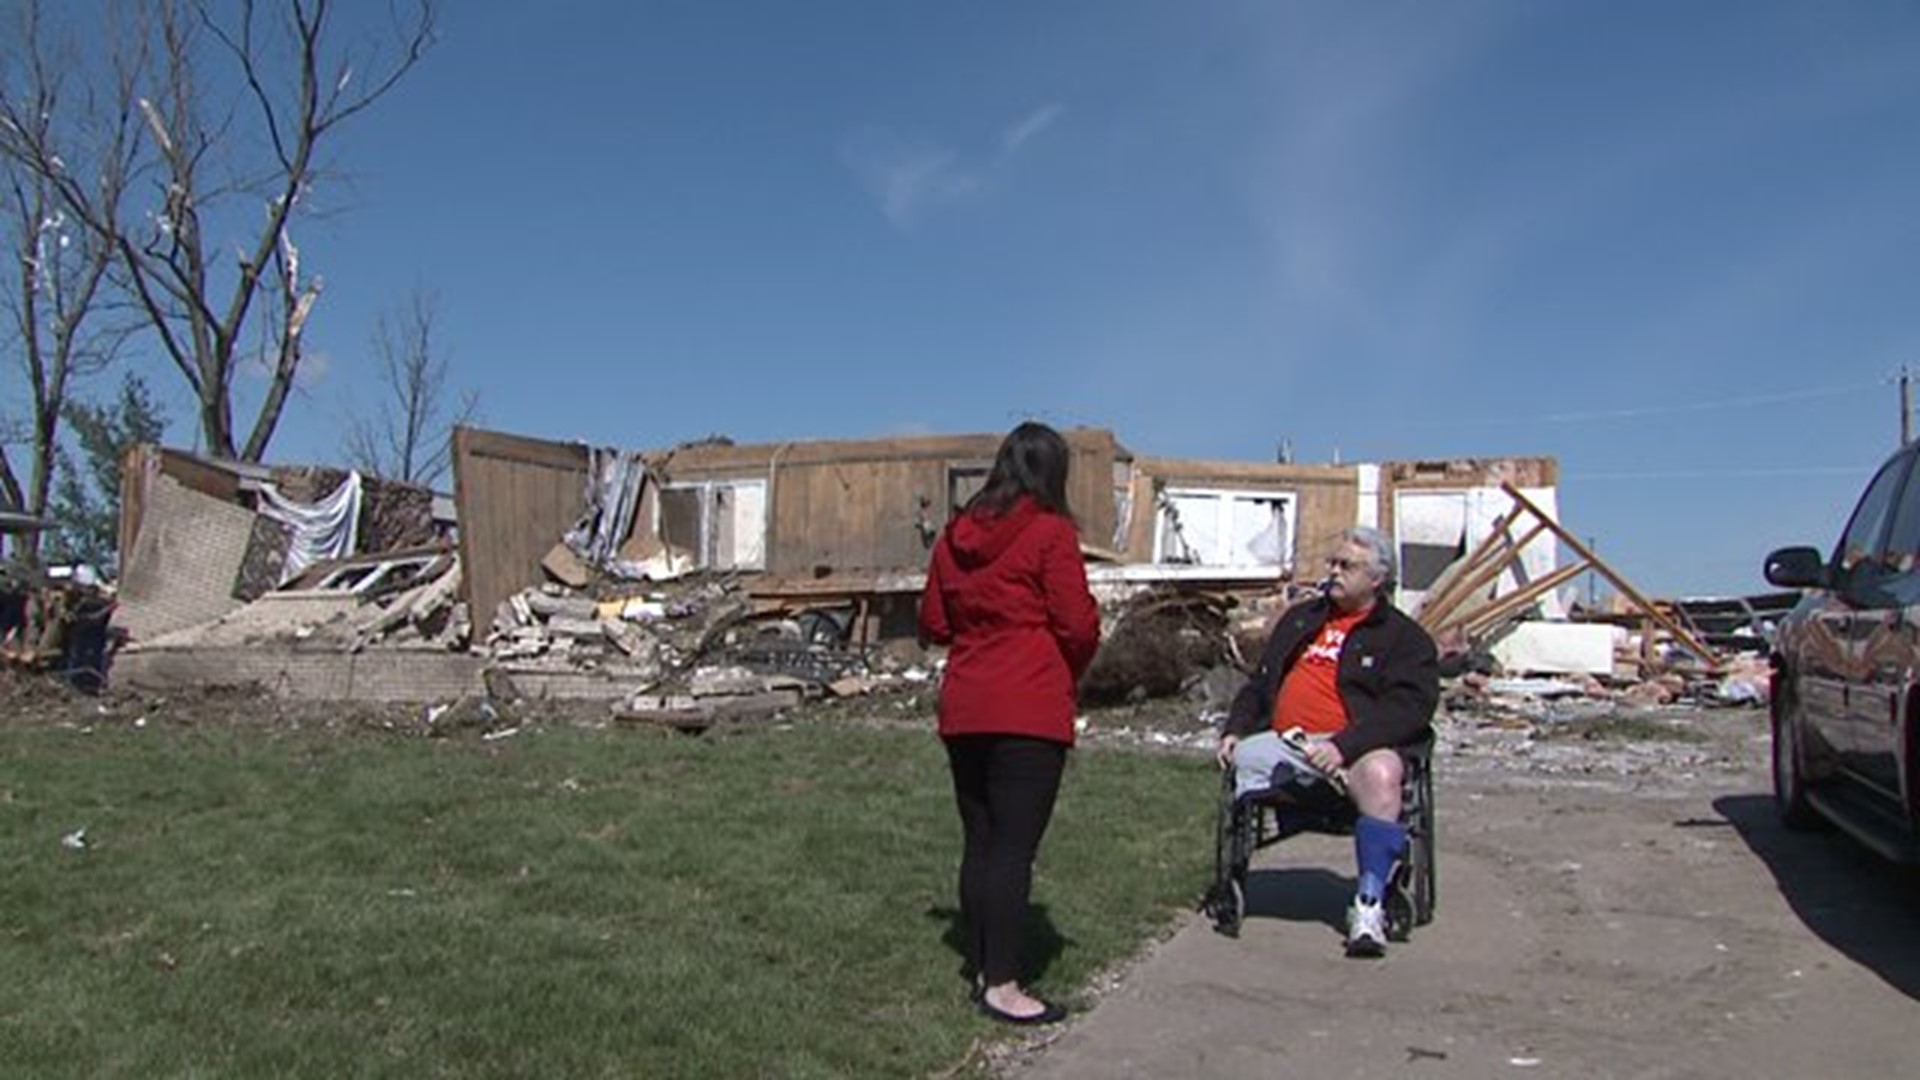 Evergreen Village residents start to make insurance claims after tornado damage